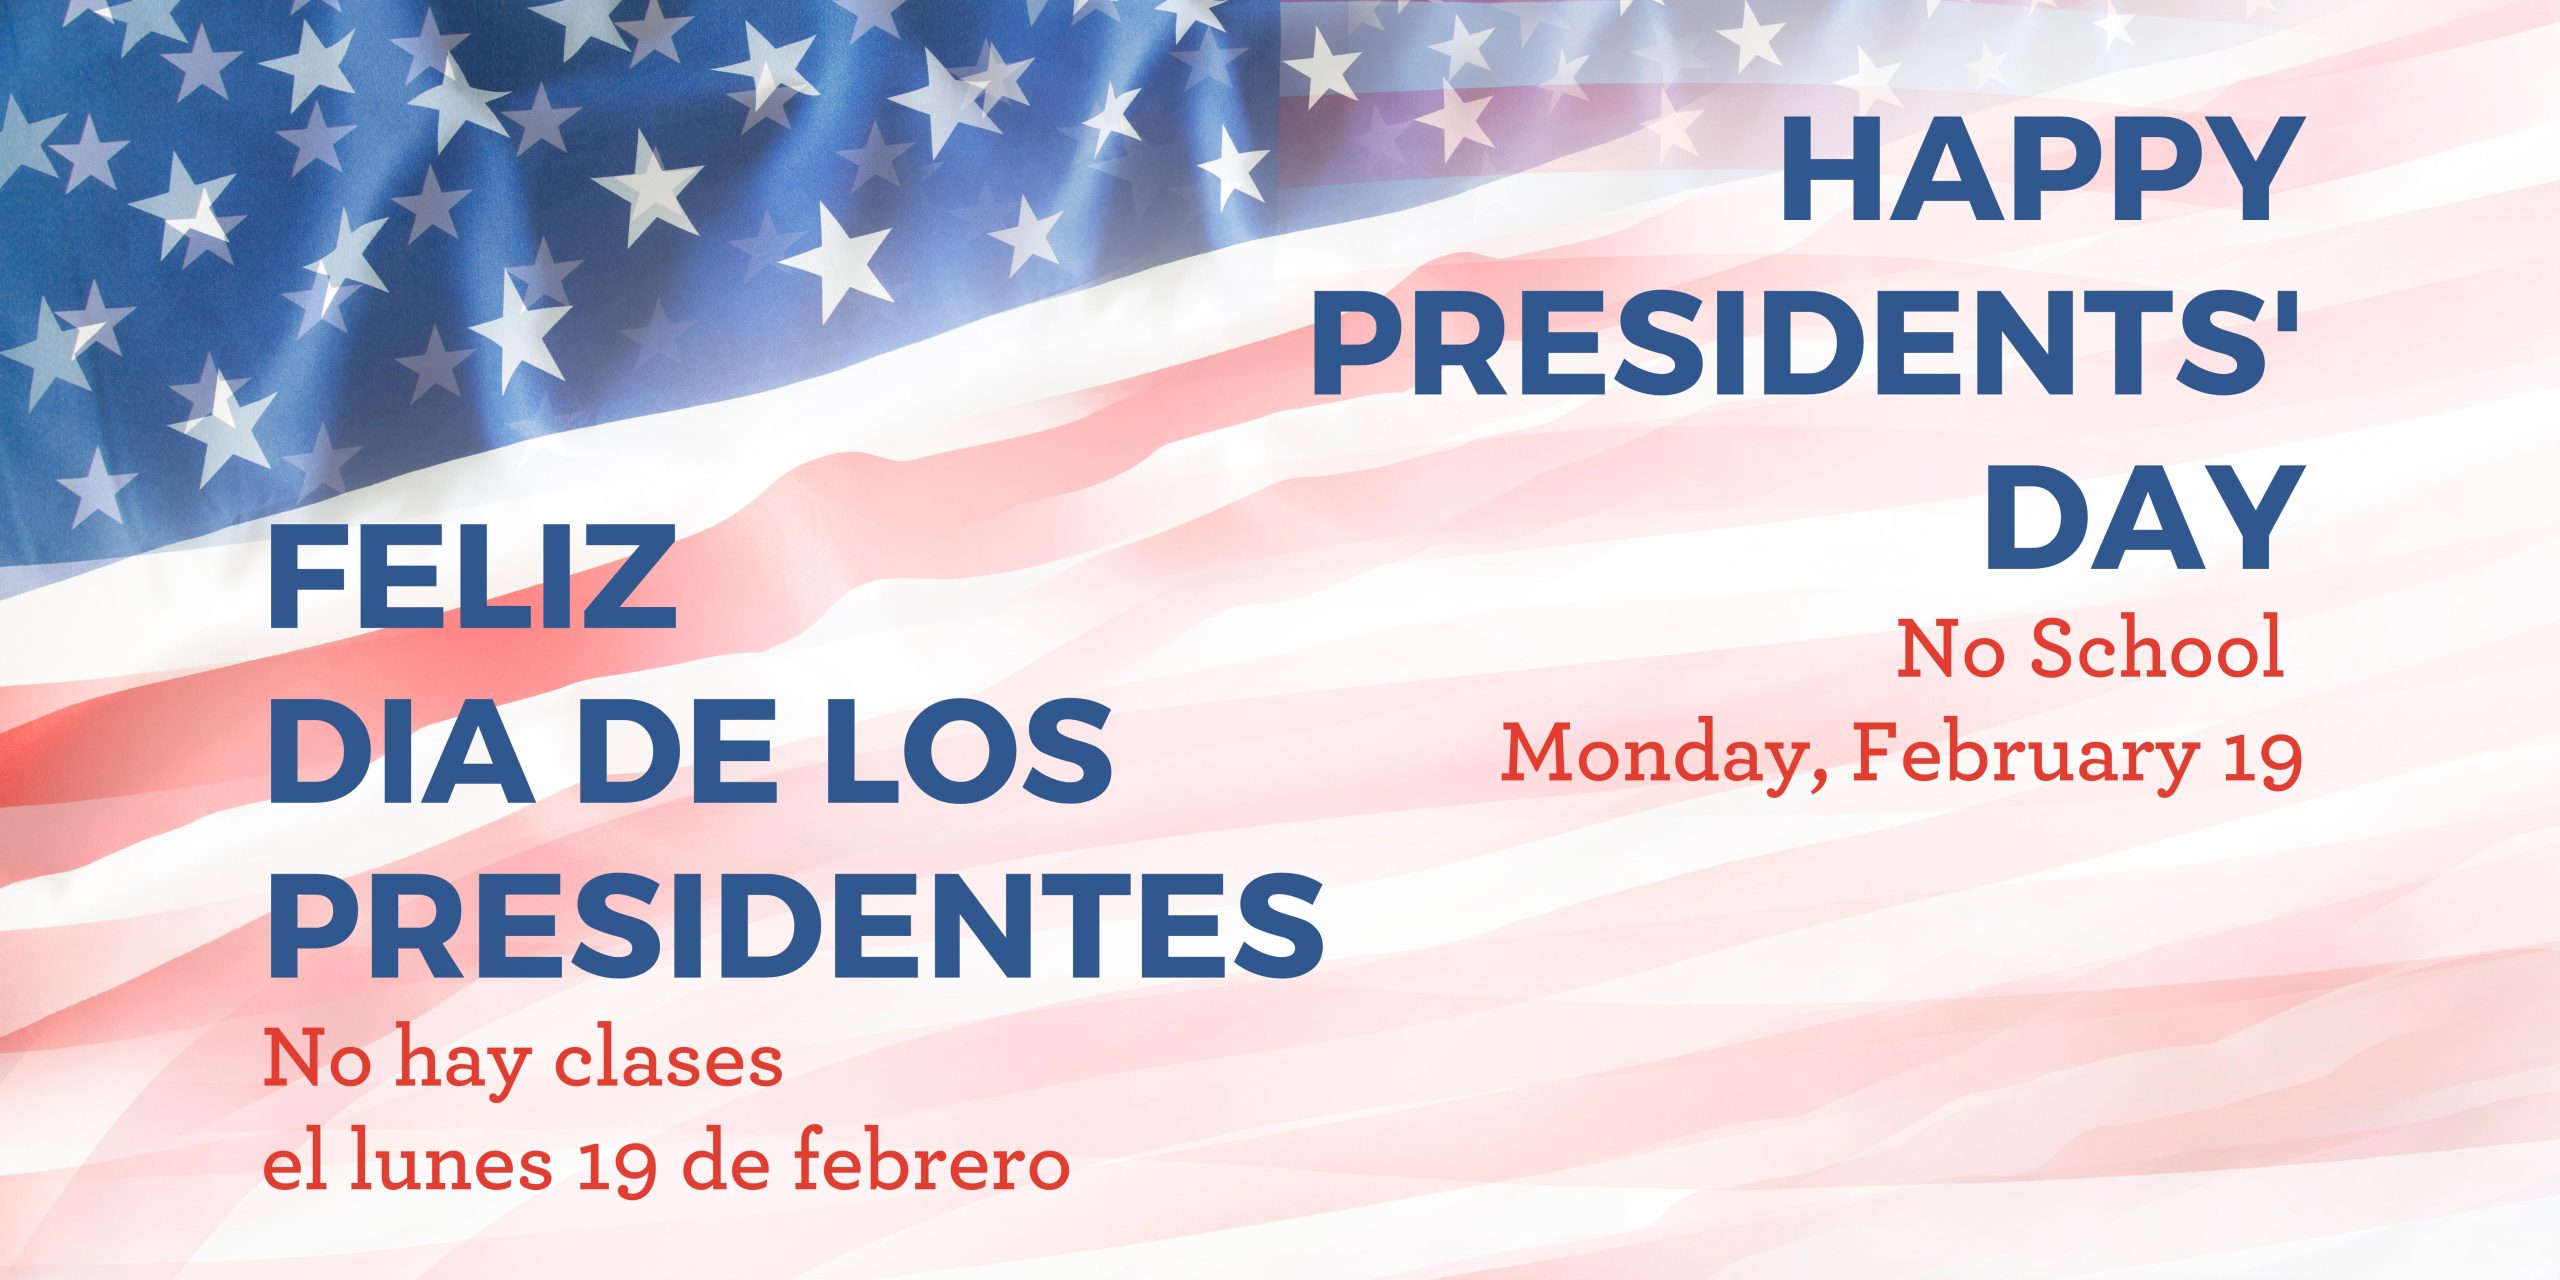 Background is American flag of red and white stripes and white stars on blue. Blue text says, "Happy Presidents' Day" and "Feliz Día de los Presidentes." Red text says, "No school Monday, February 19" and "No hay clases el lunes 19 de febrero."